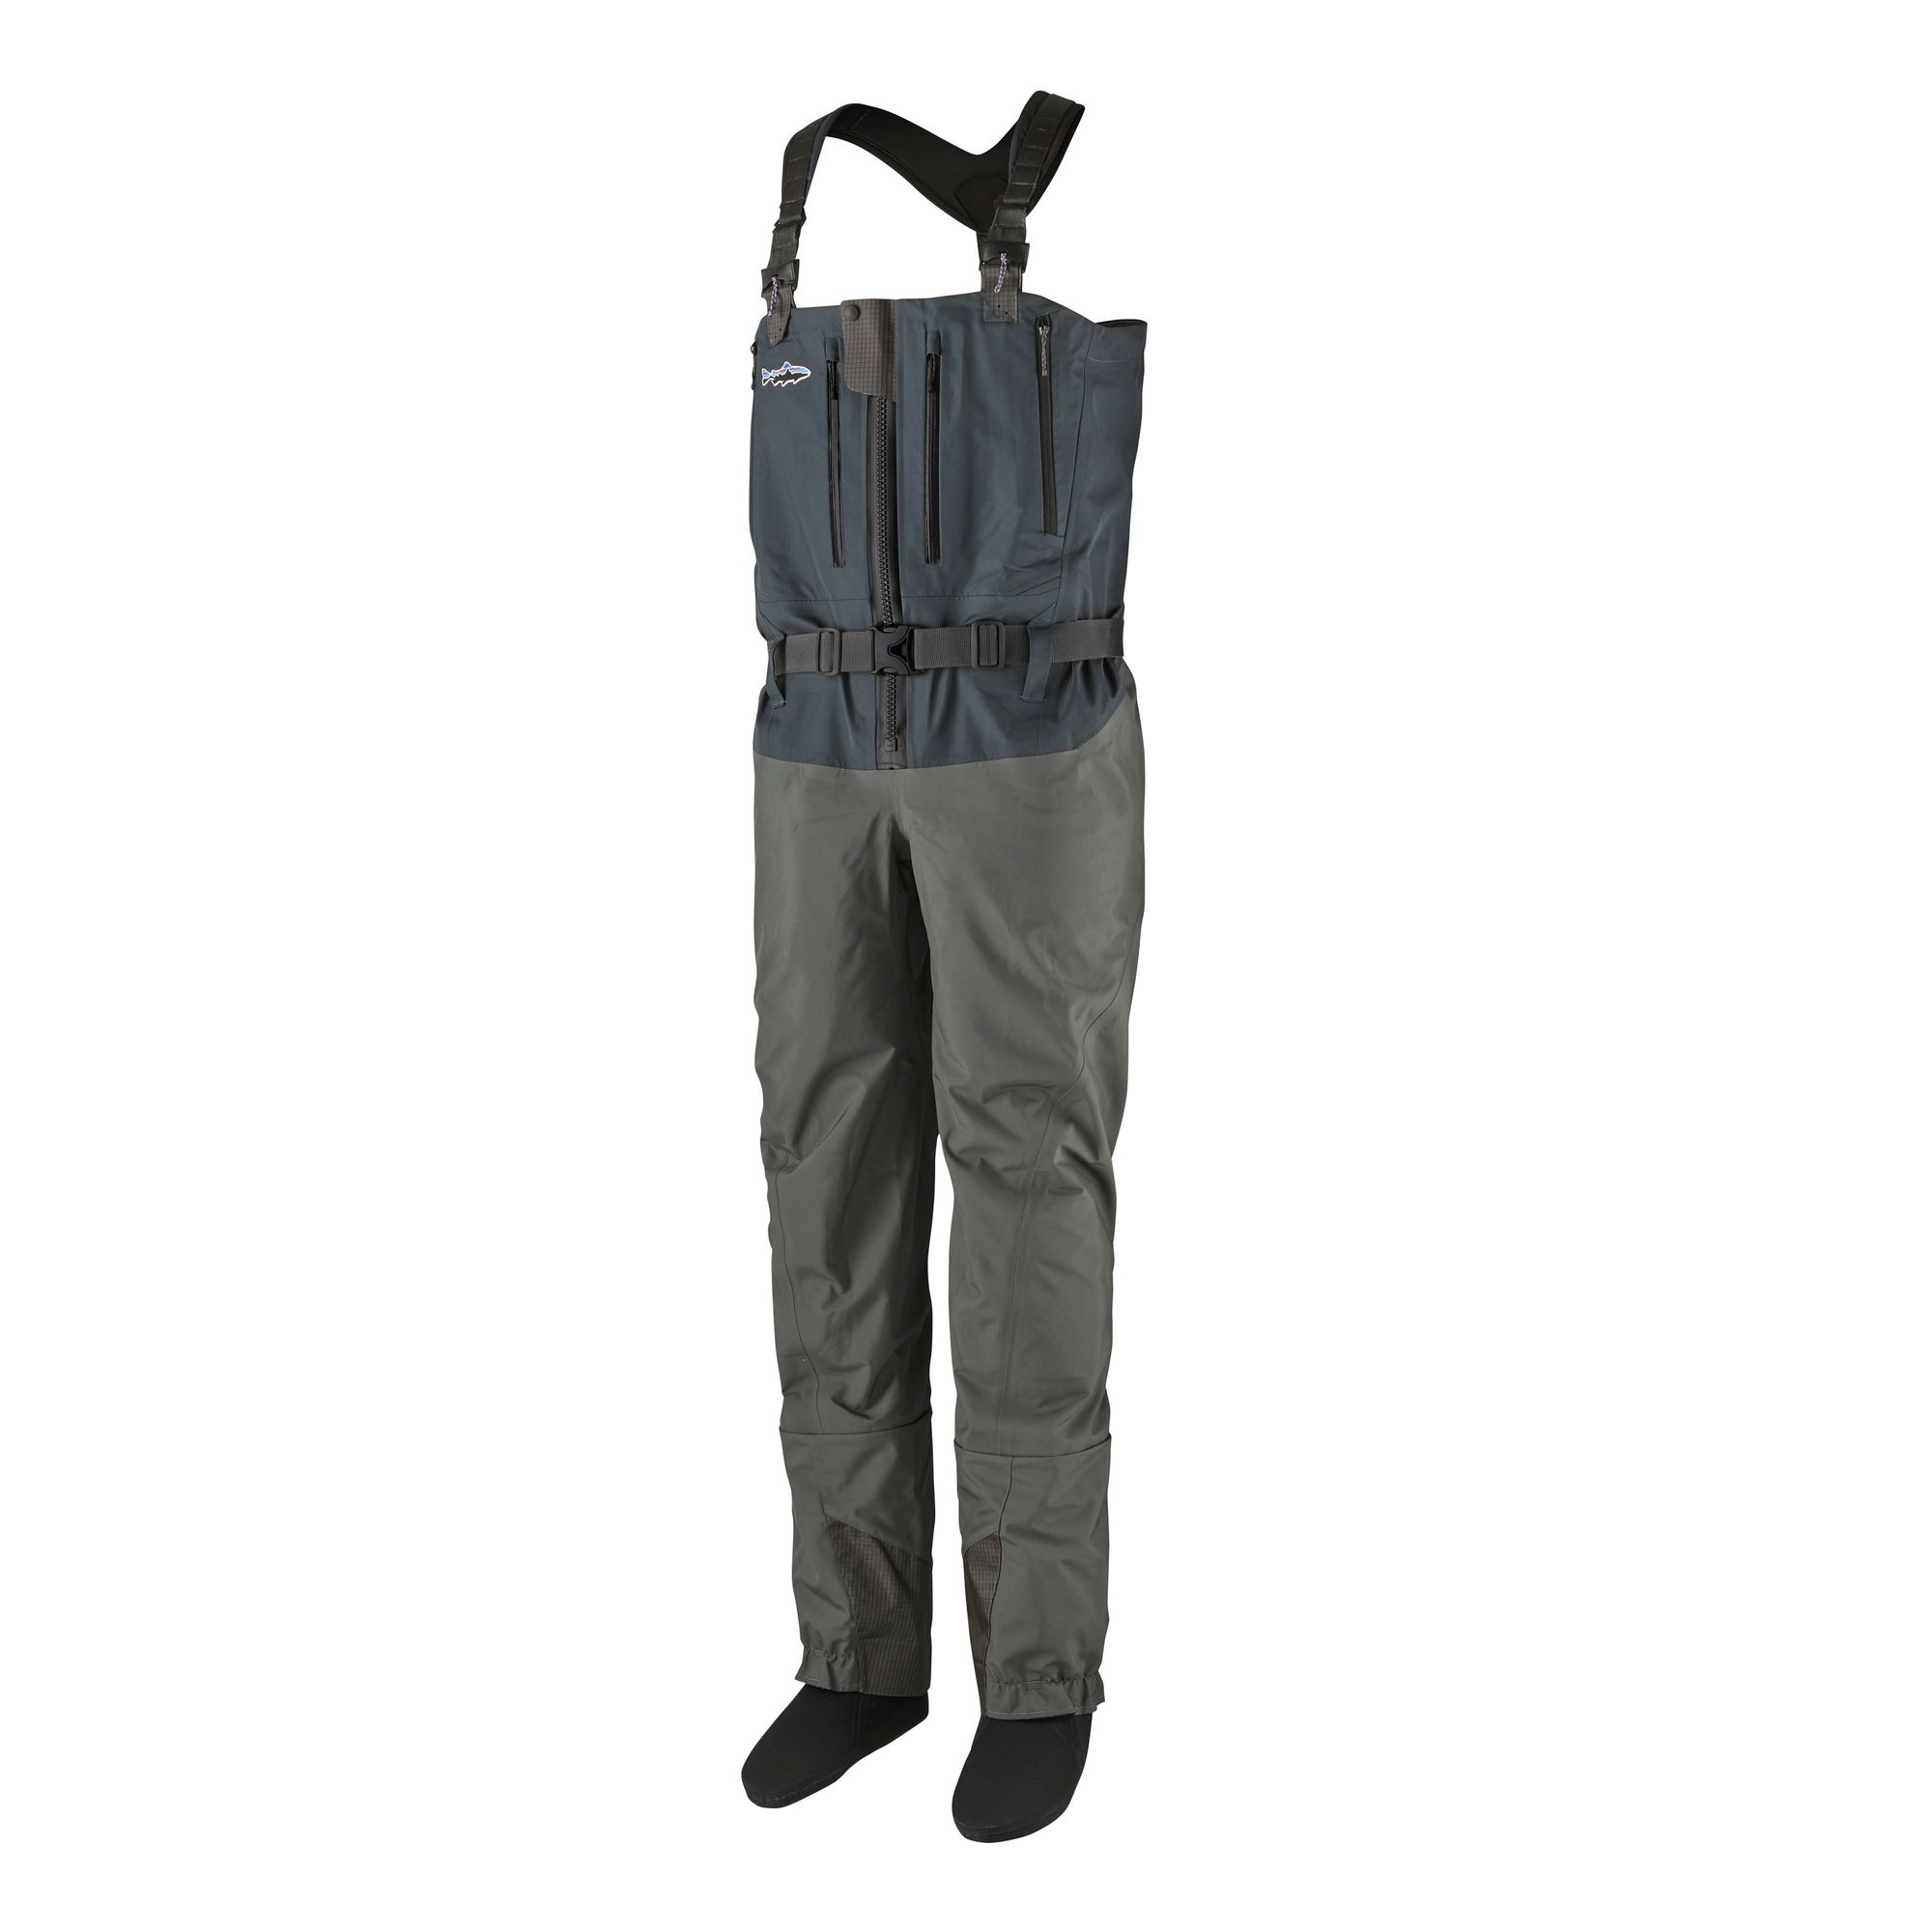 Patagonia Men’s Swiftcurrent Expedition Zip Front Waders - Fin & Game